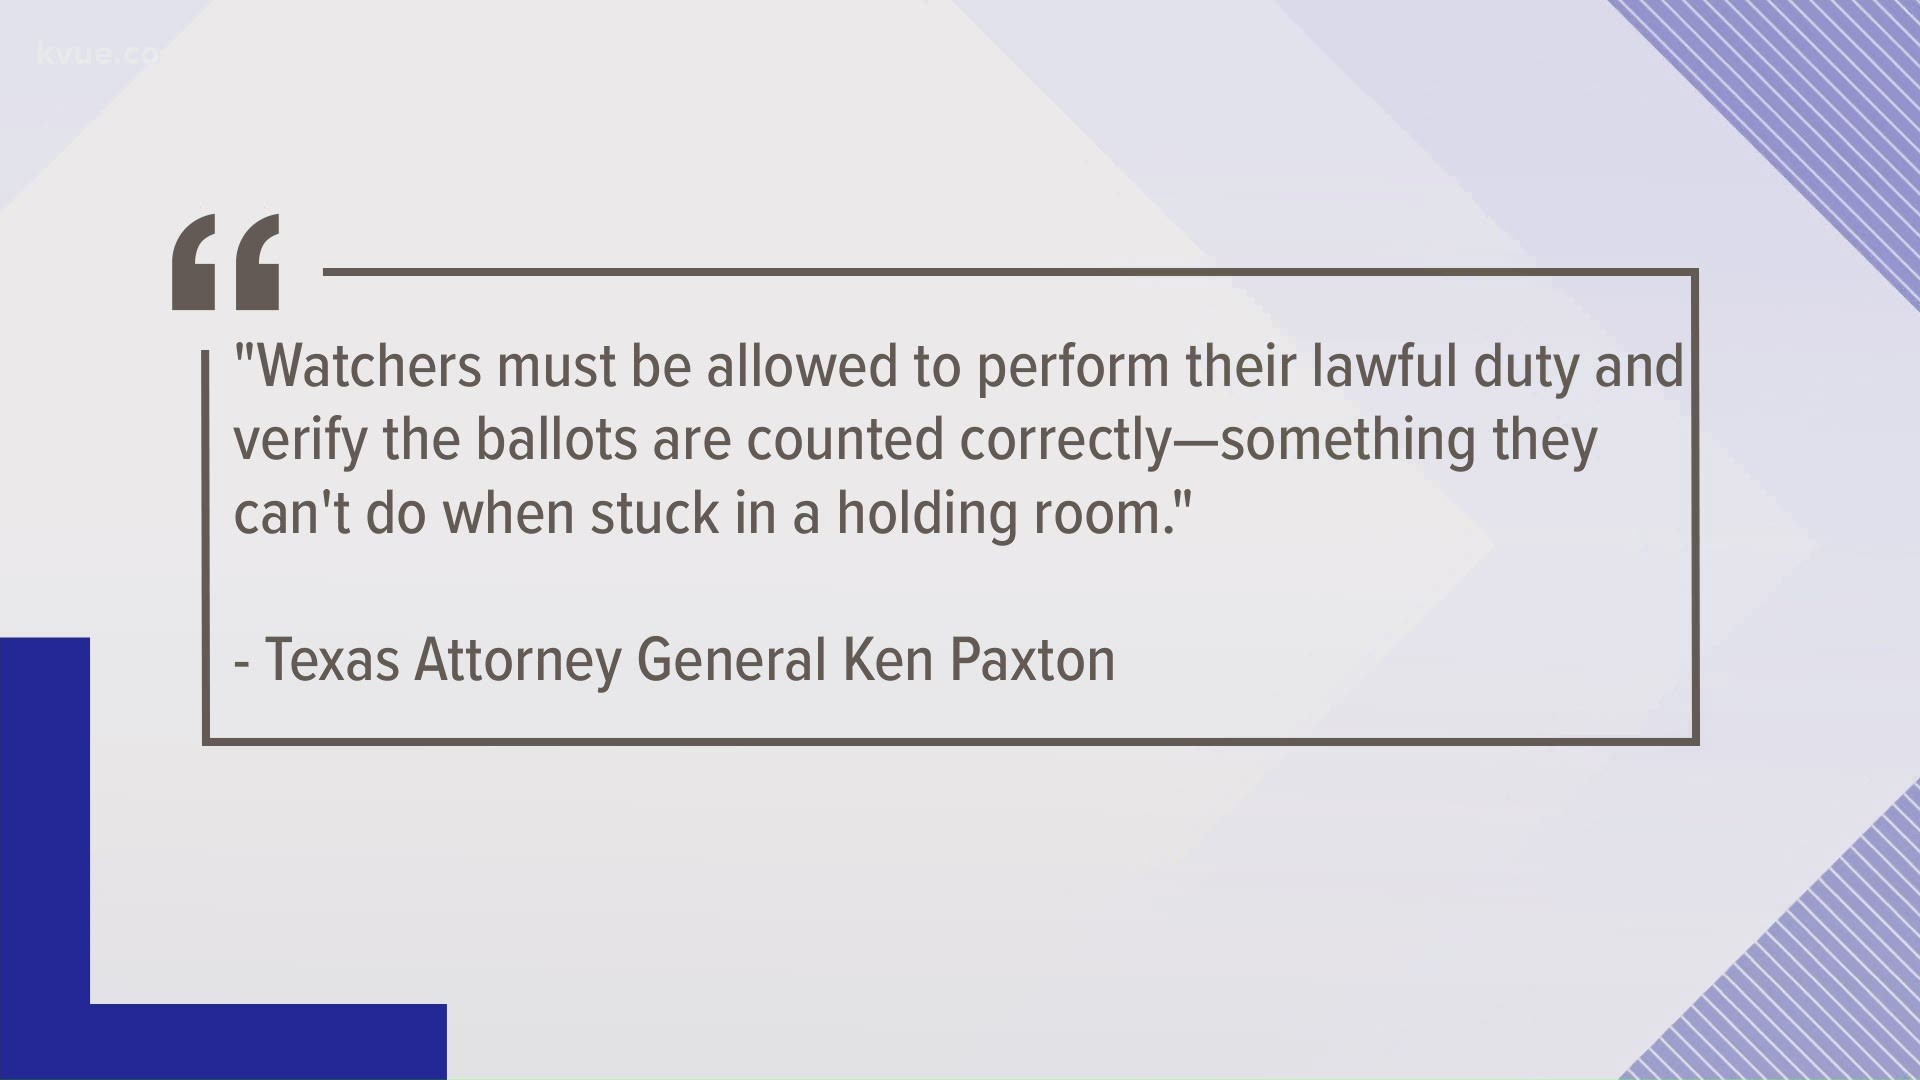 Ken Paxton filed a brief in the Texas Supreme Court arguing that county county election officials must permit poll watchers to observe the counting of ballots.